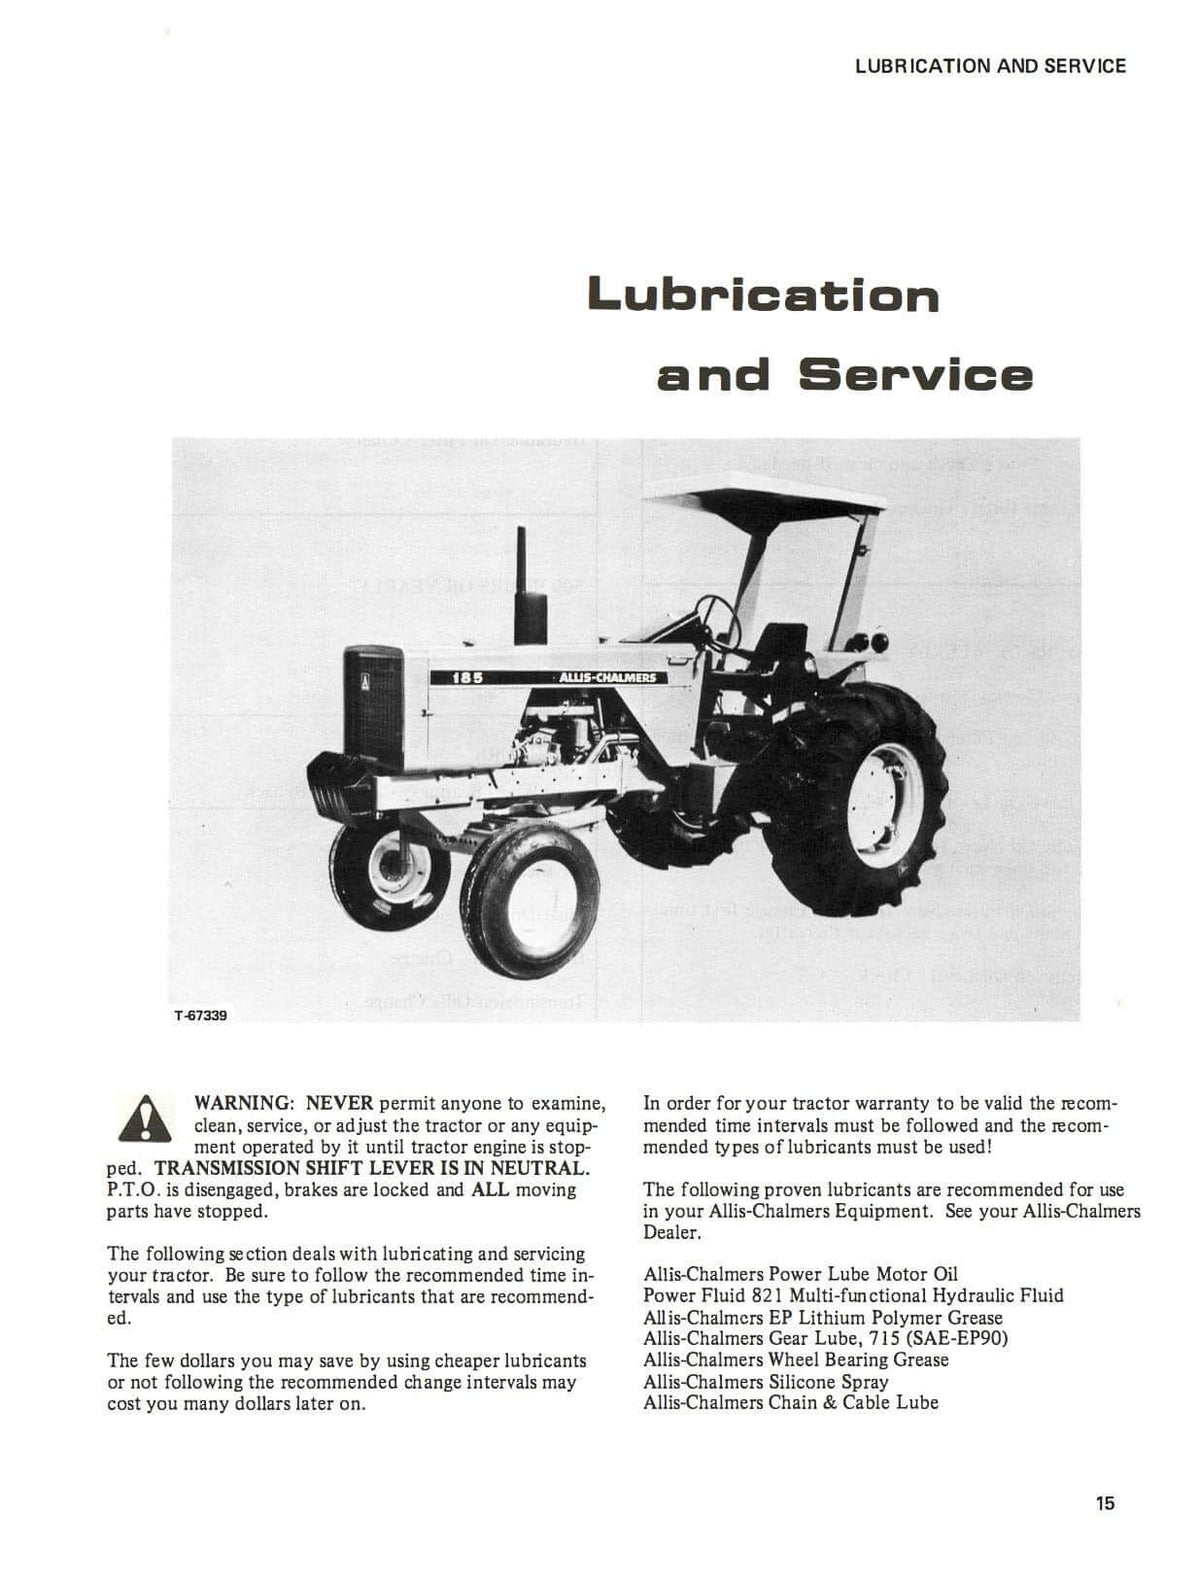 Allis-Chalmers 185 Diesel Tractor - Operator's Manual - Ag Manuals - A Provider of Digital Farm Manuals - 2